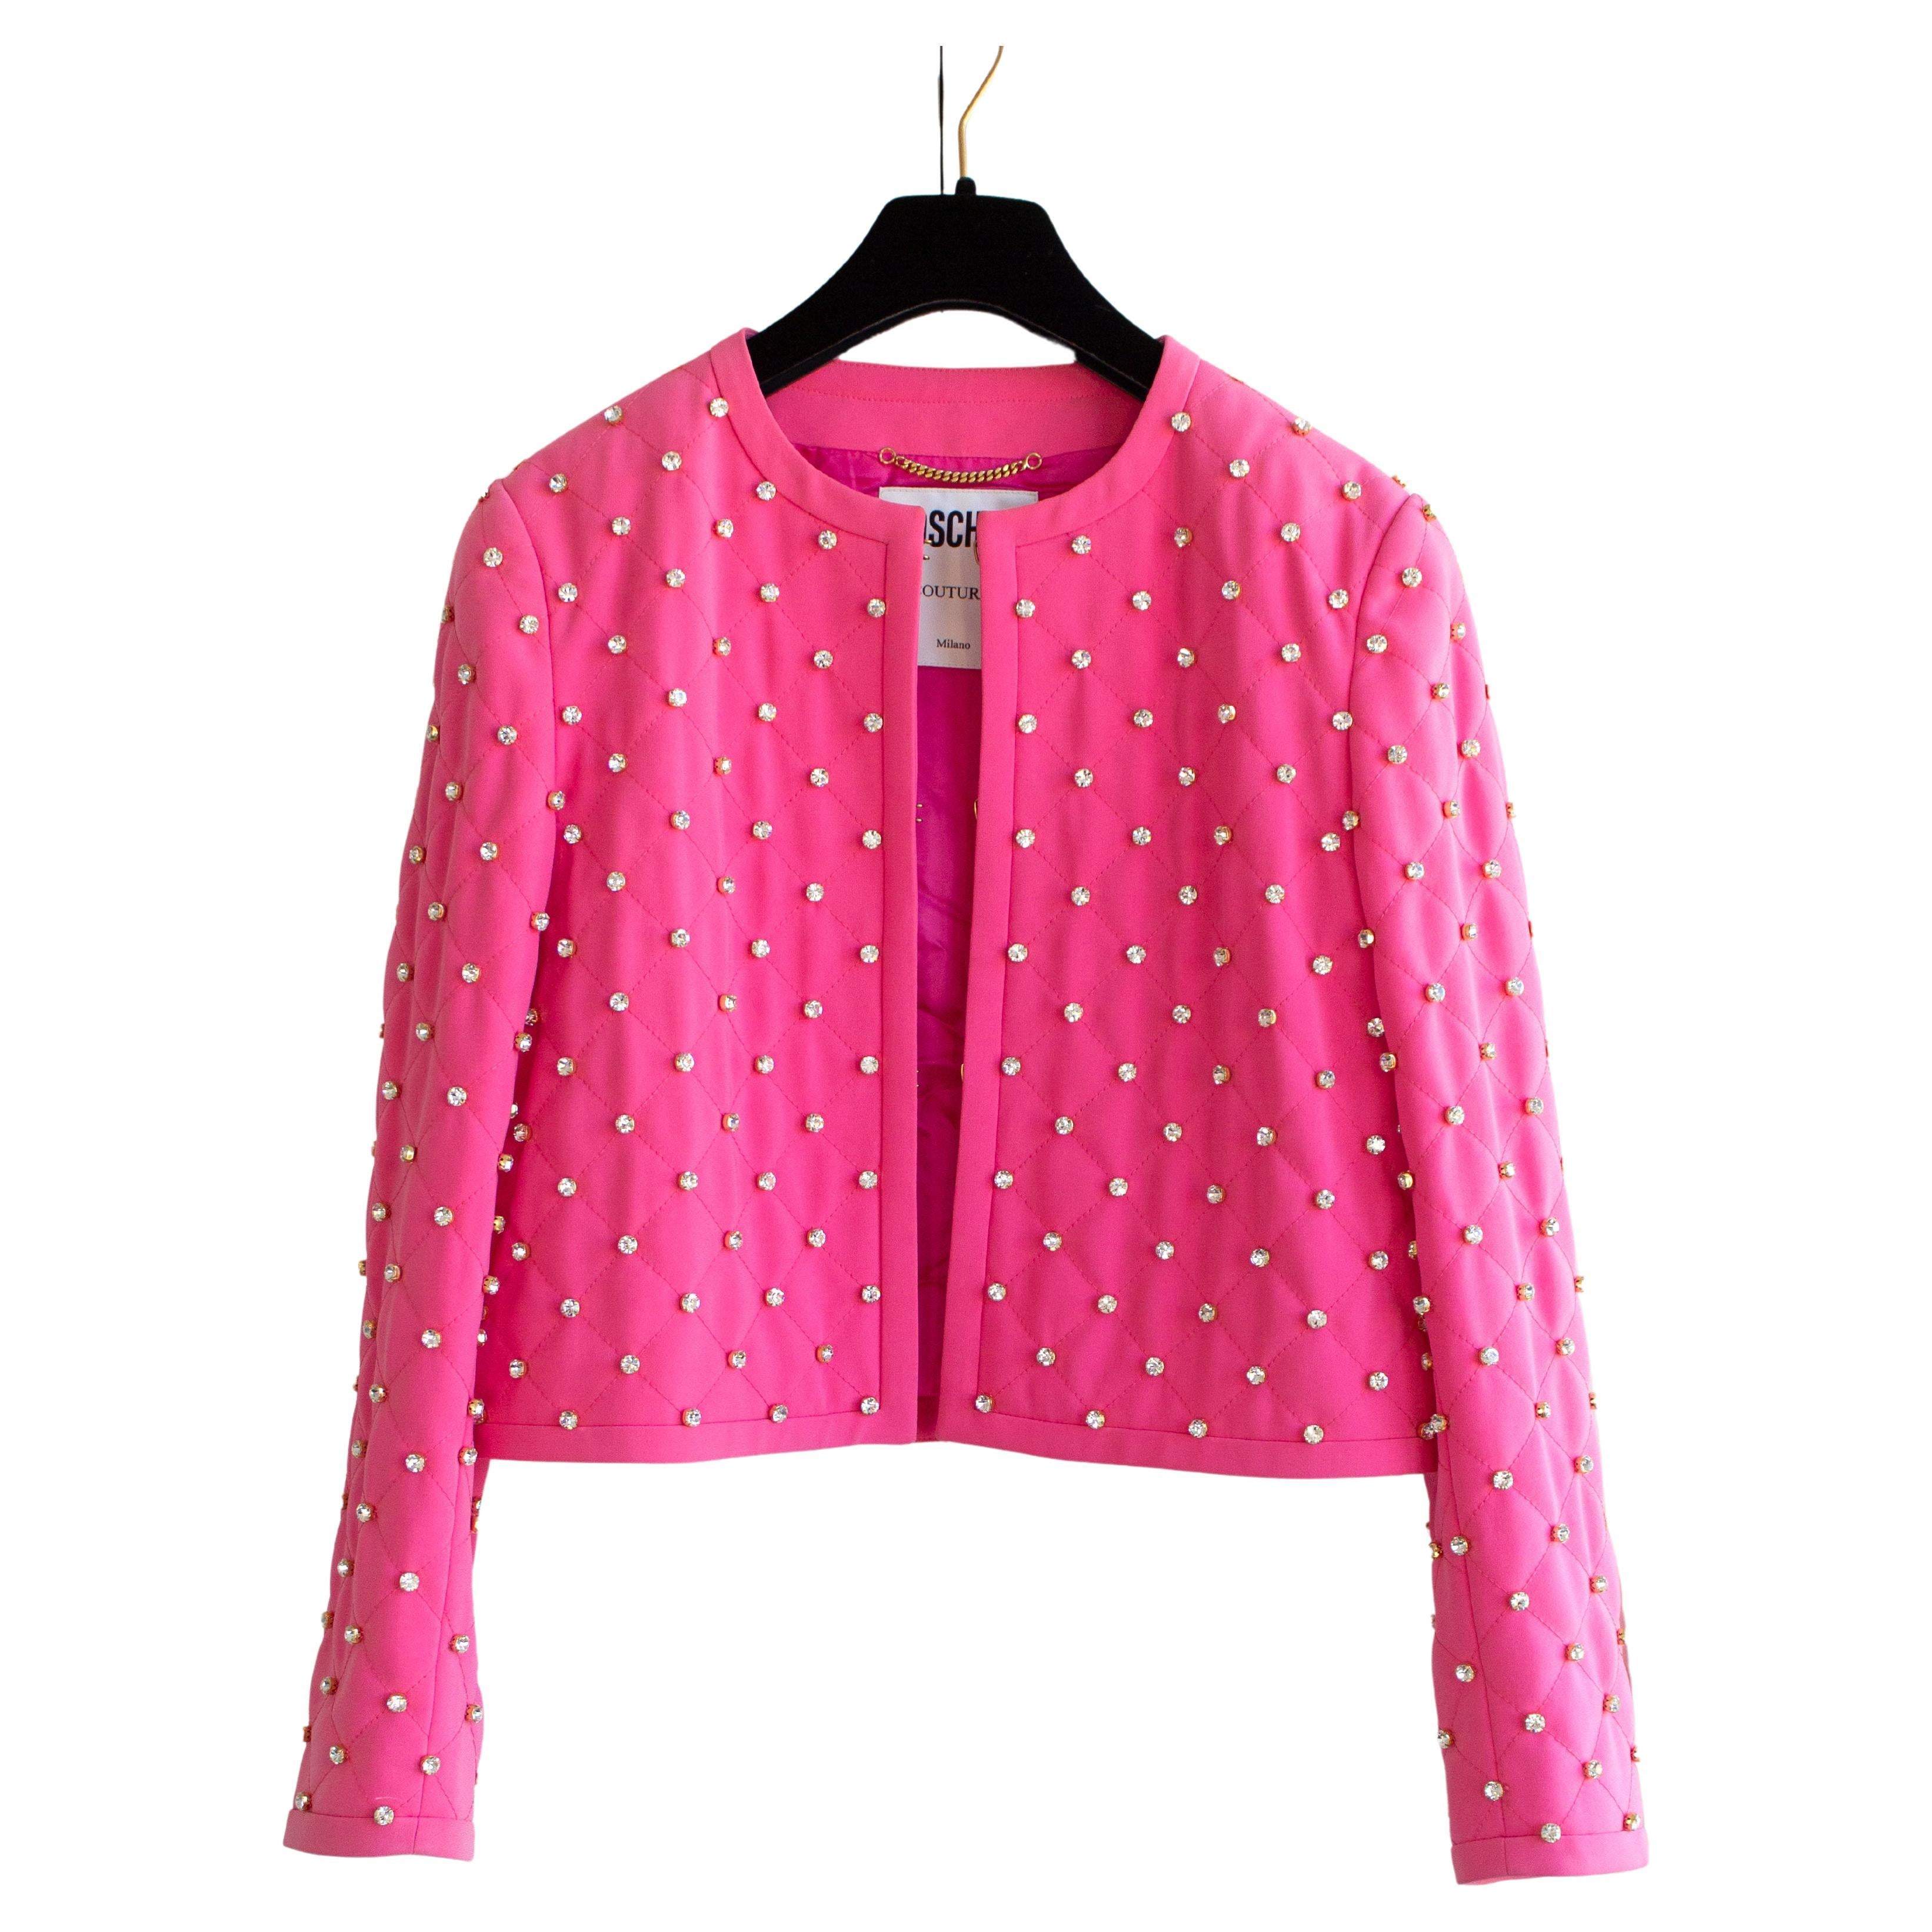 Moschino Couture S/S 2015 Barbie Crystal Embellished Rhinestone Pink Jacket For Sale